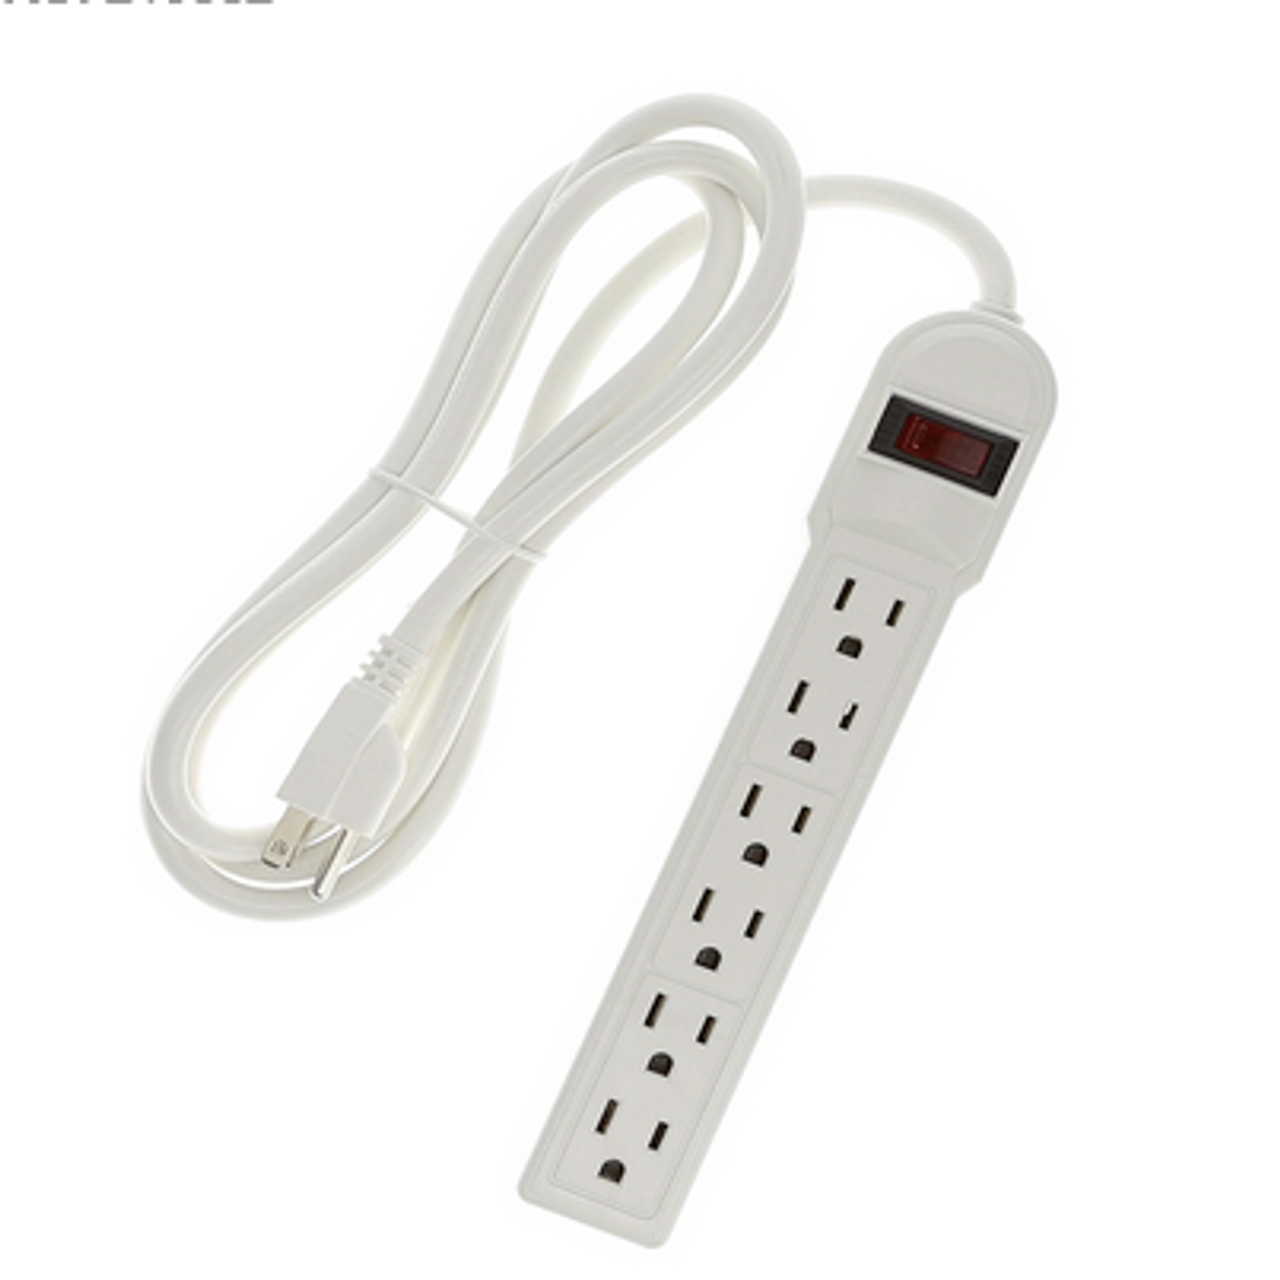 6 Outlet Surge Protector Power Strip with 6 ft. Cord